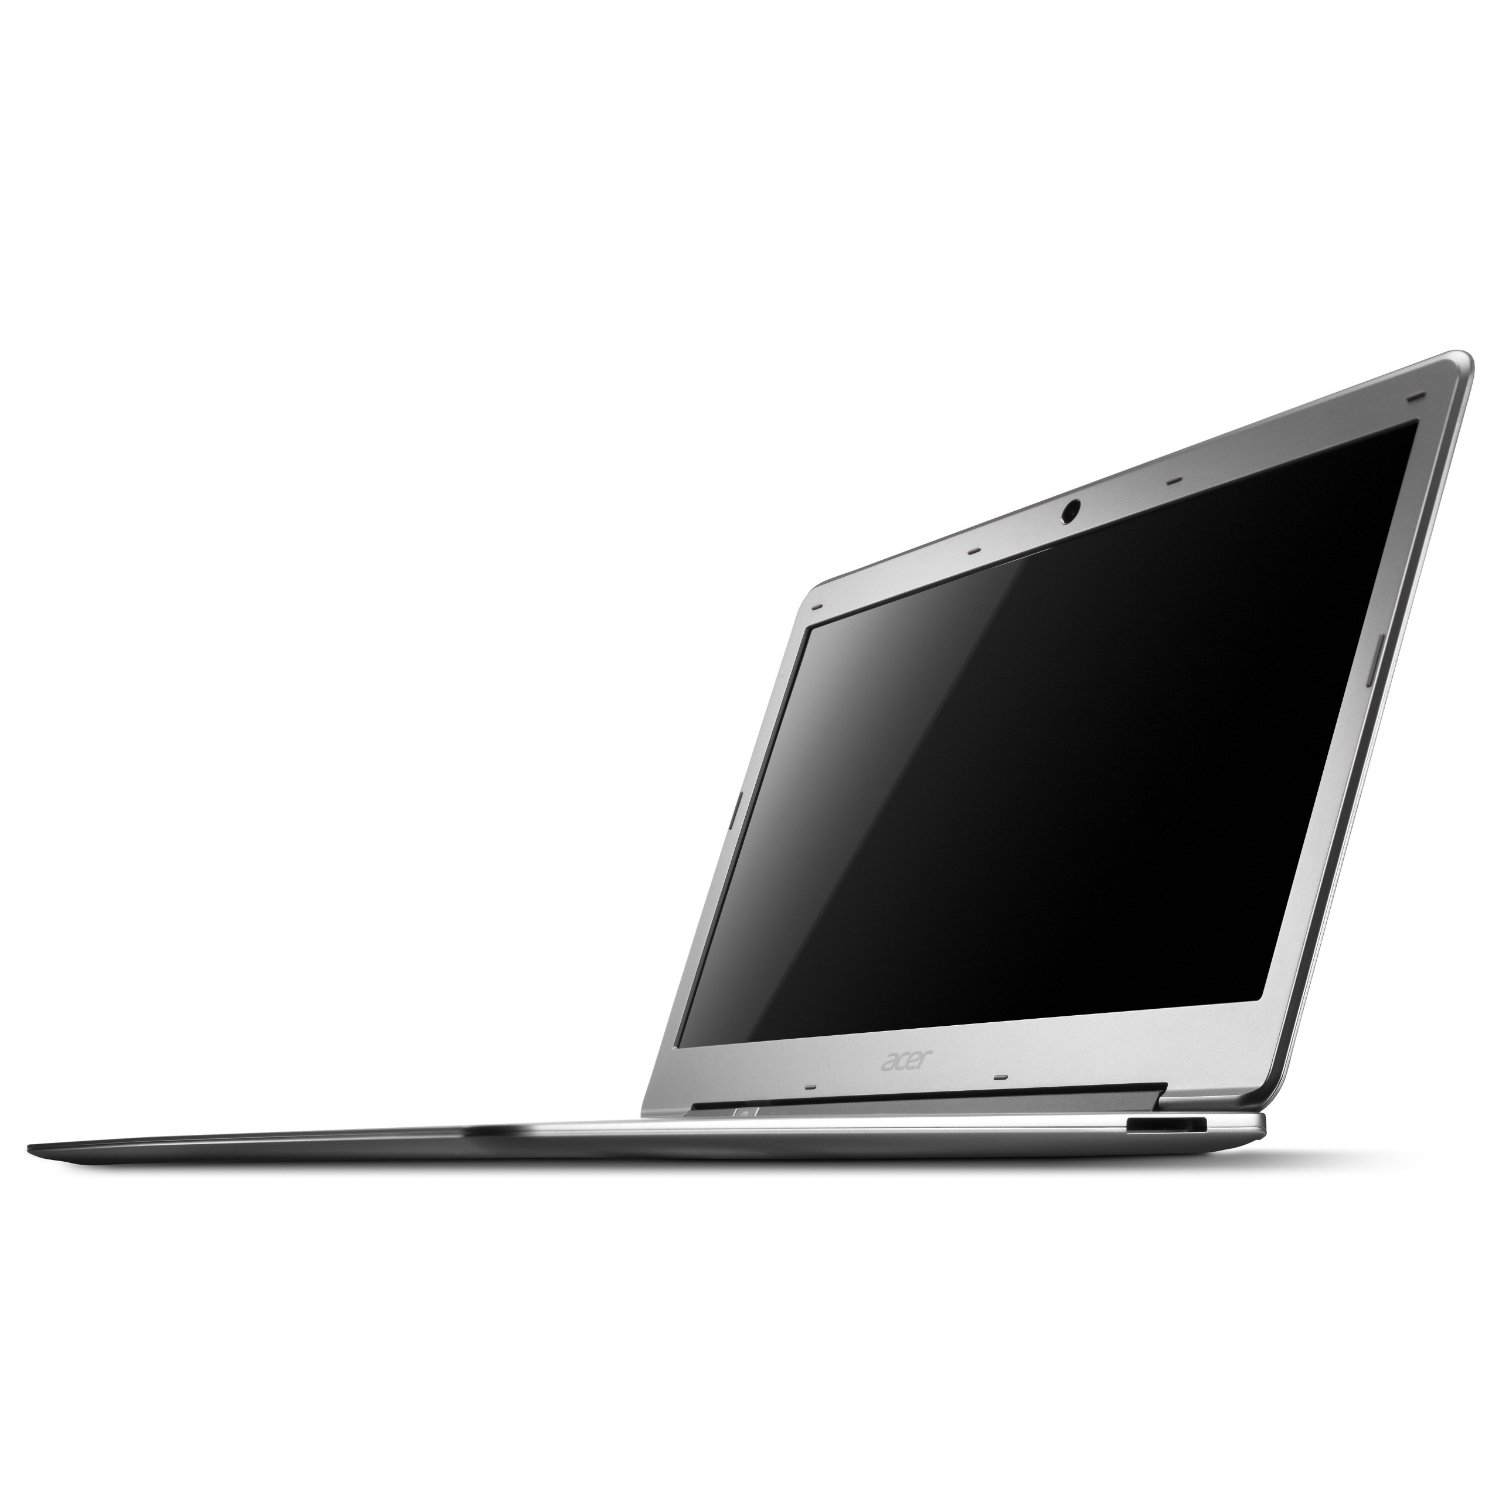 http://thetechjournal.com/wp-content/uploads/images/1110/1318646337-acer-aspire-s39516646-ultrabook-with-133inch-hd-display-9.jpg